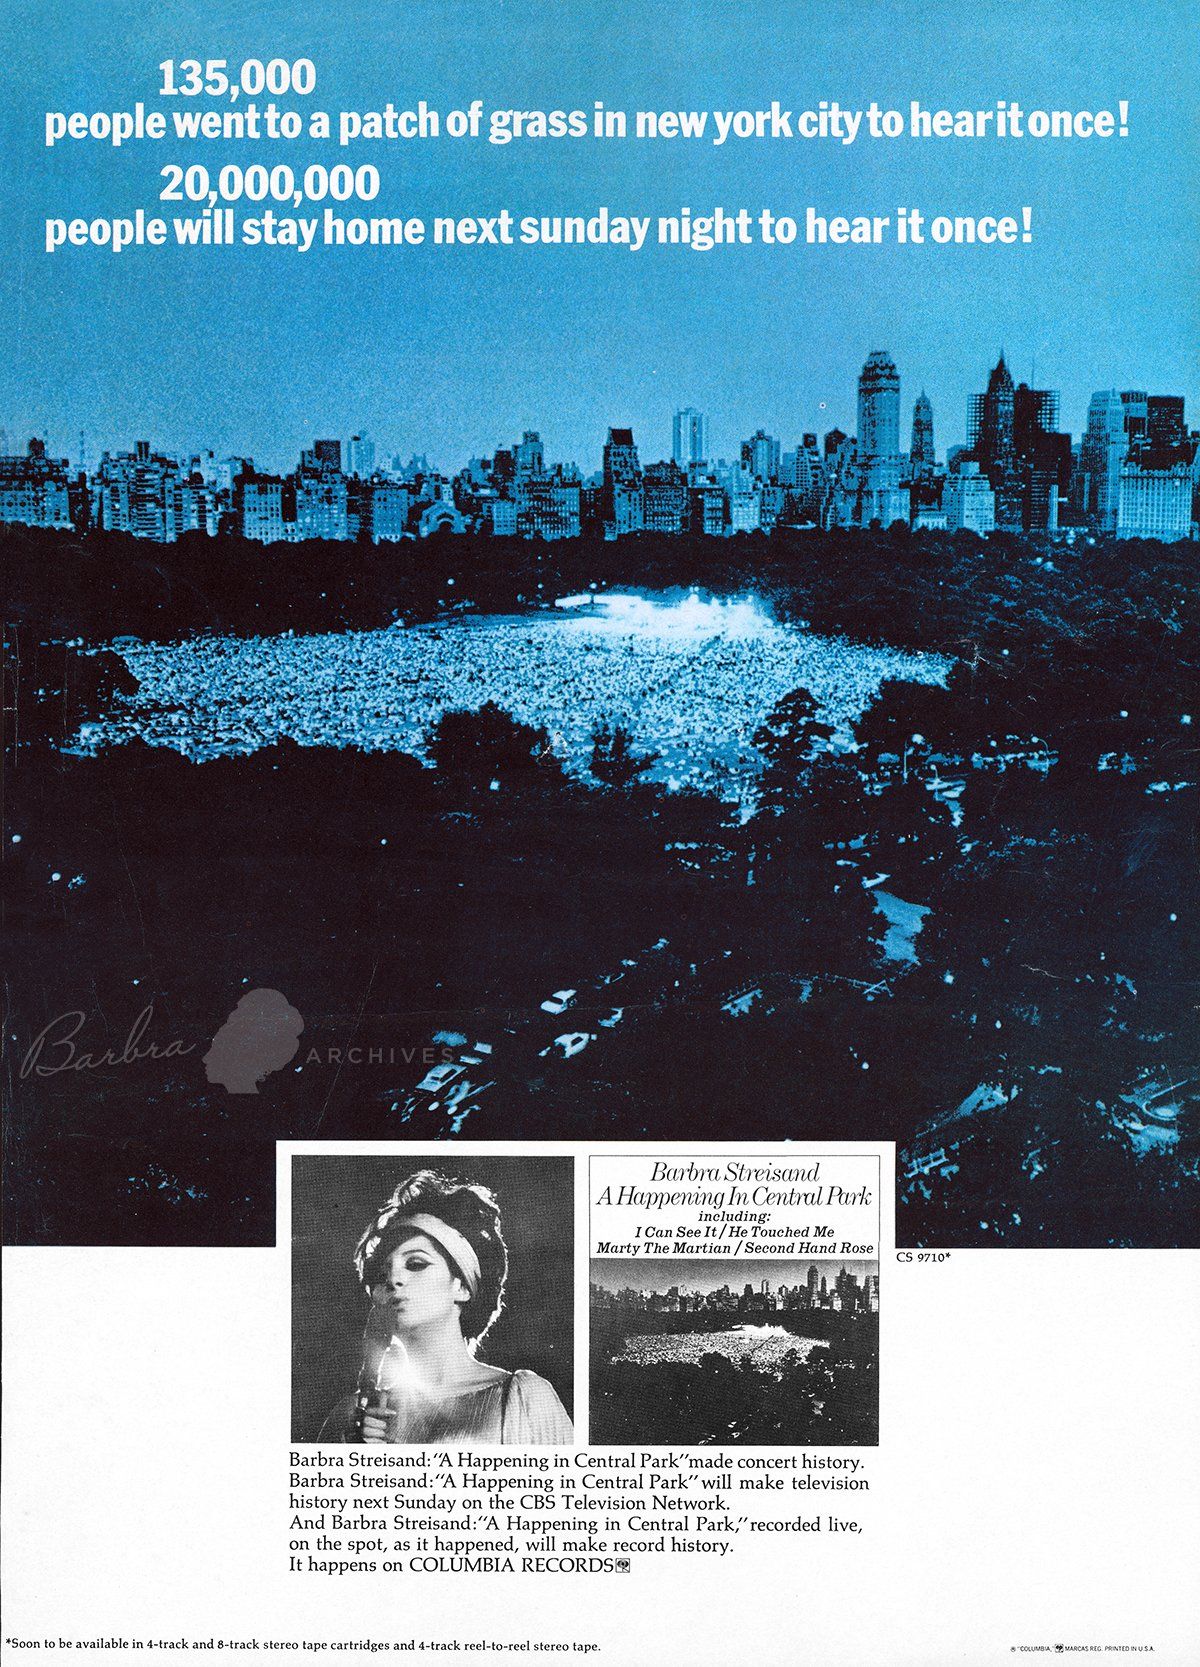 Columbia Records ad for the Central Park album.